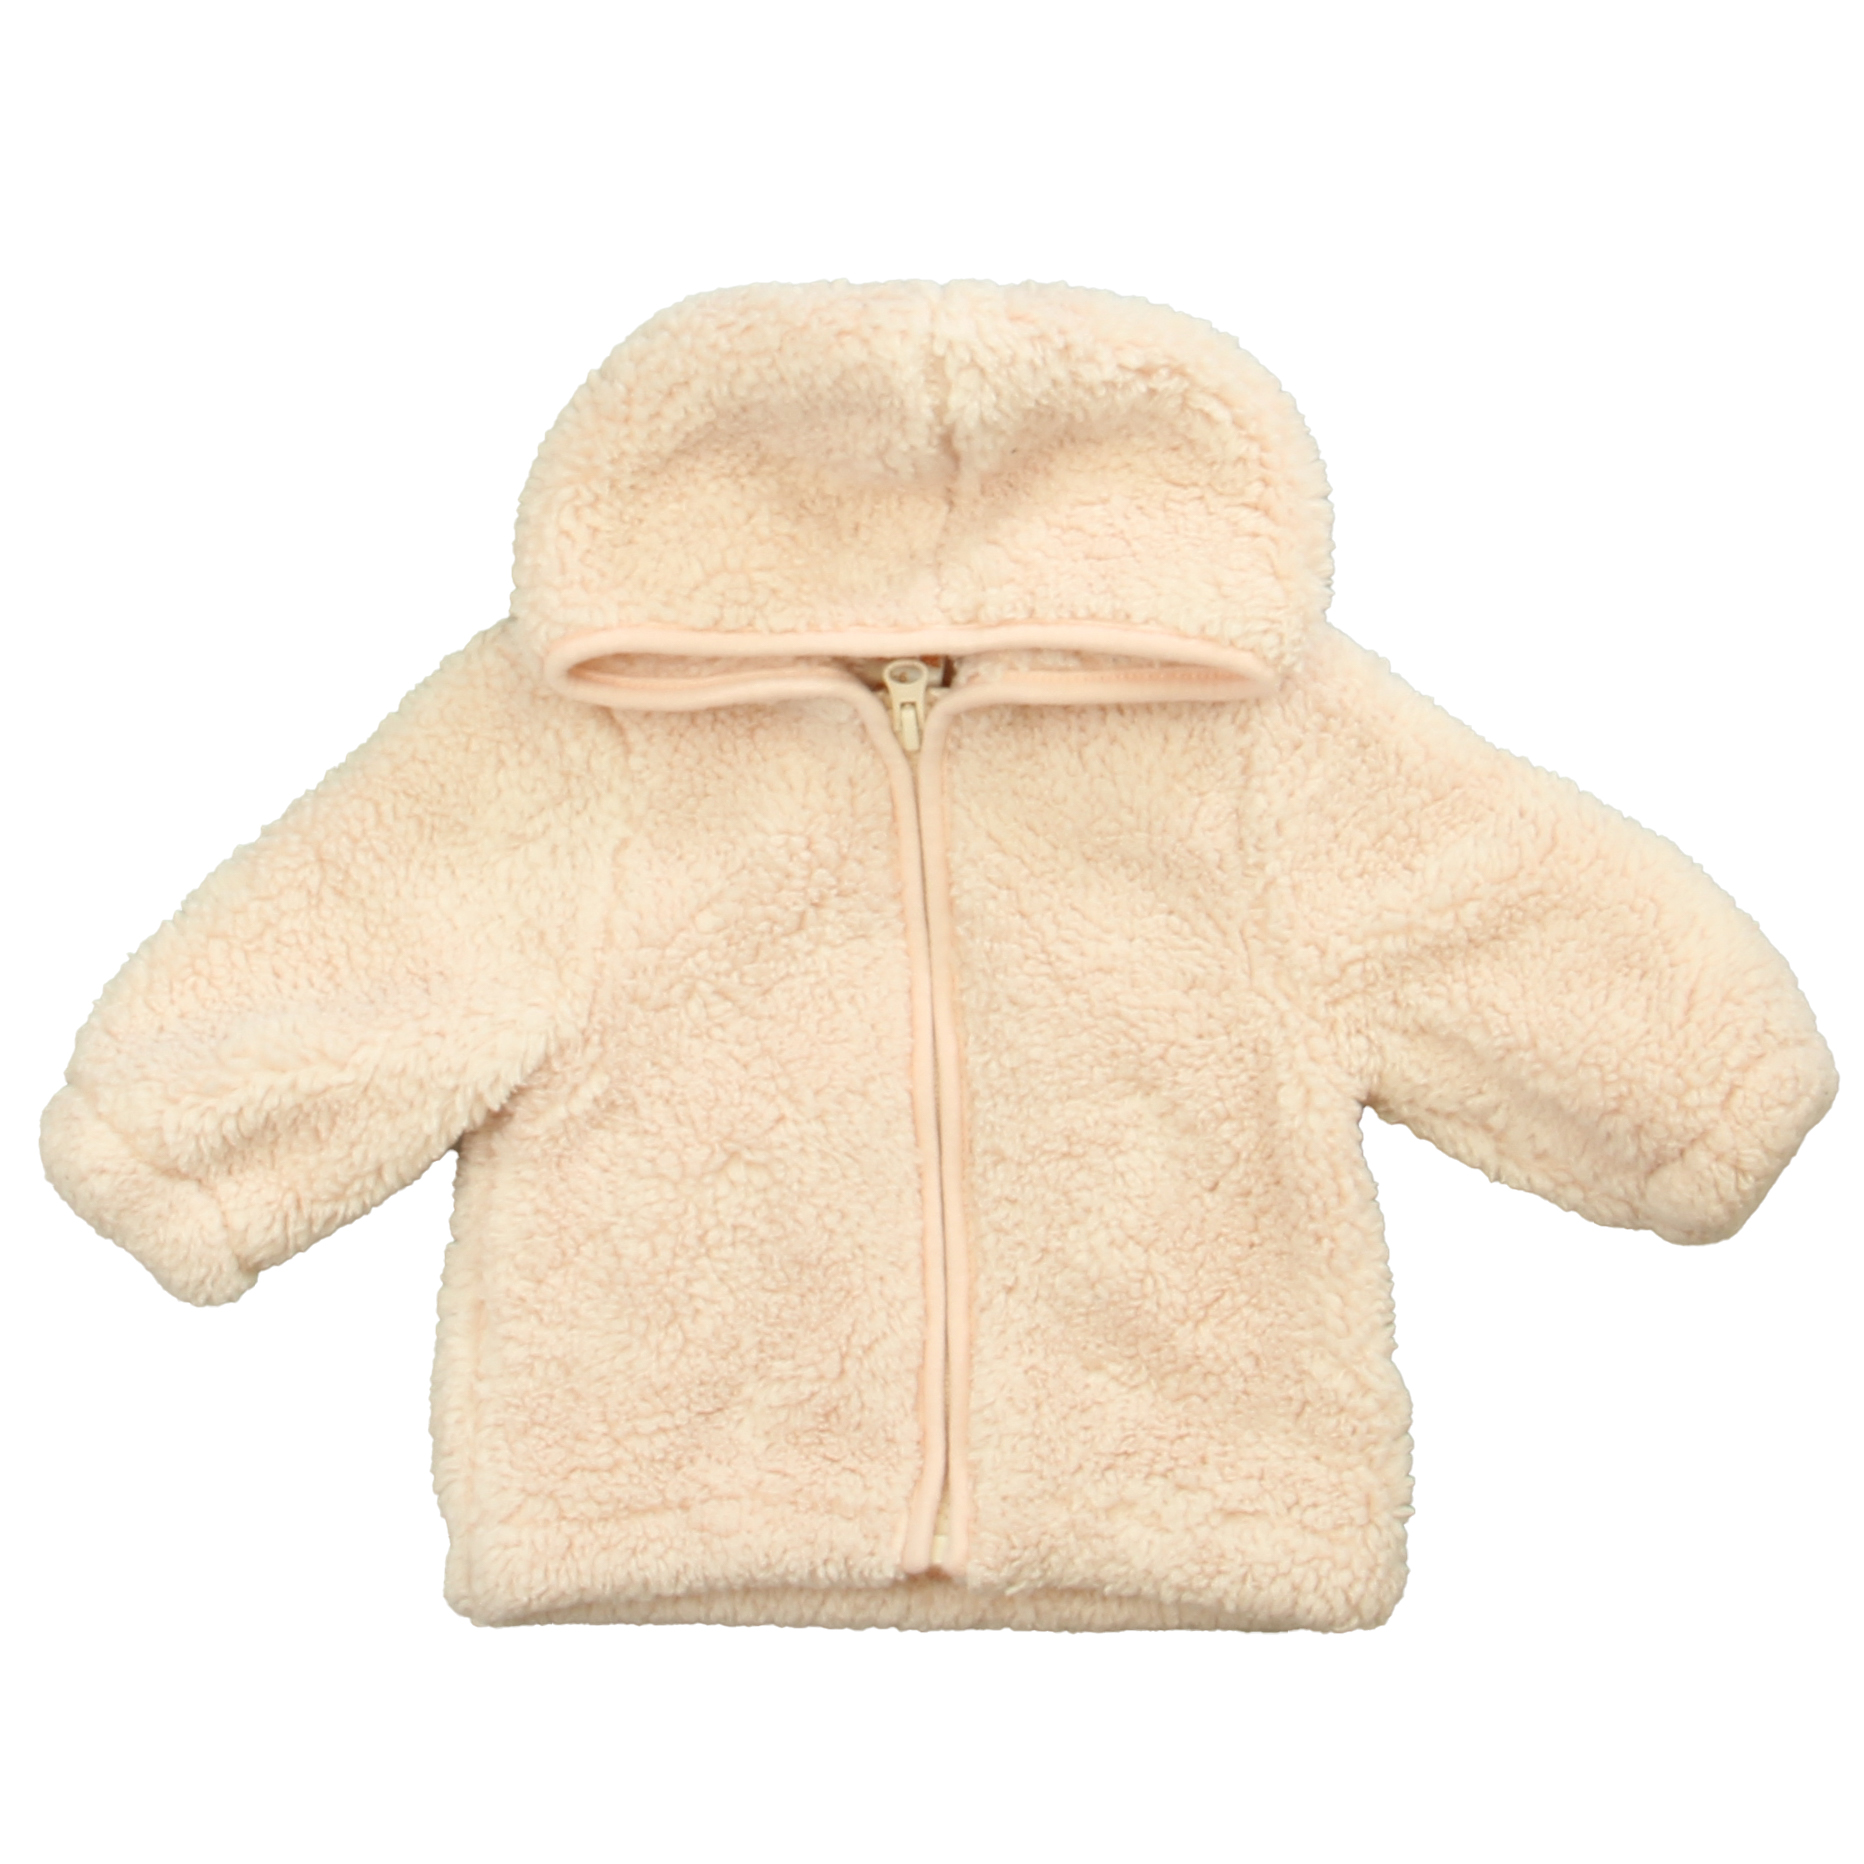 Fleece size: 3-6 Month - The Swoondle Society